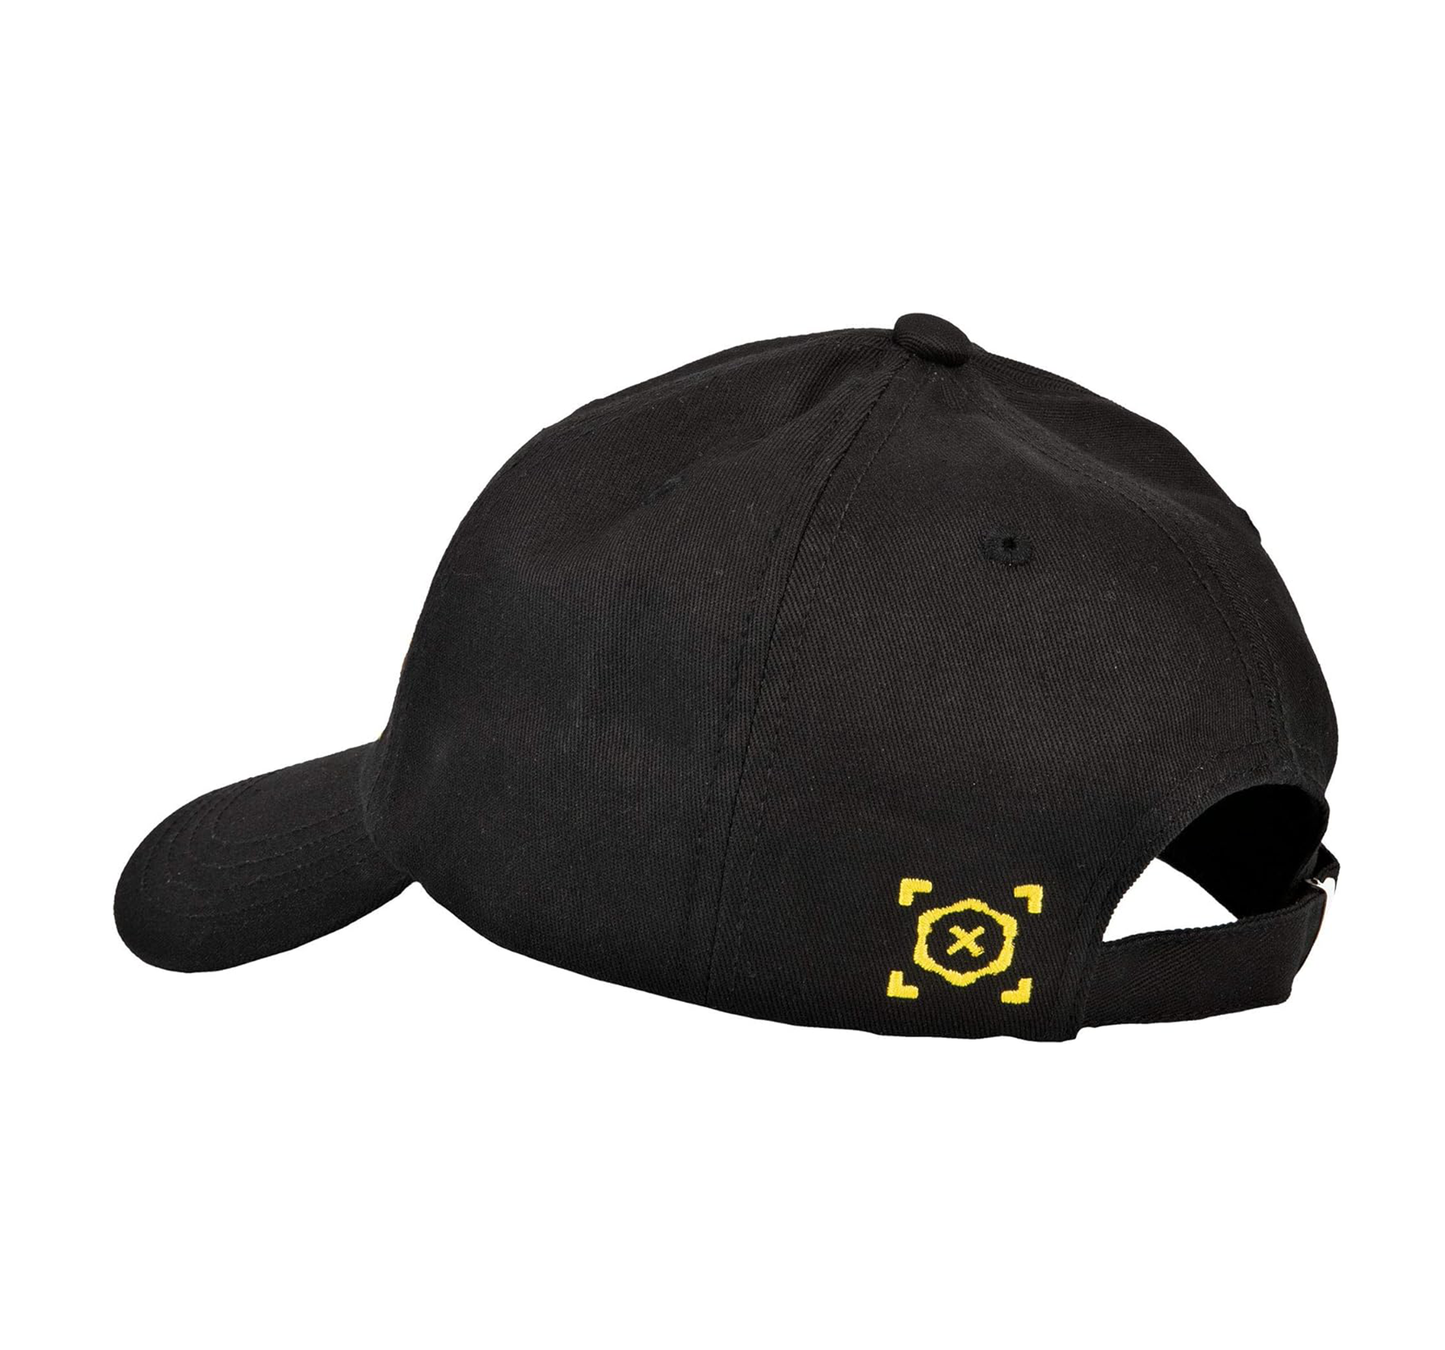 three quarter angle of a black curved bill hat with "Cyberpunk 2077" embroidered across the front and a gear logo on the back